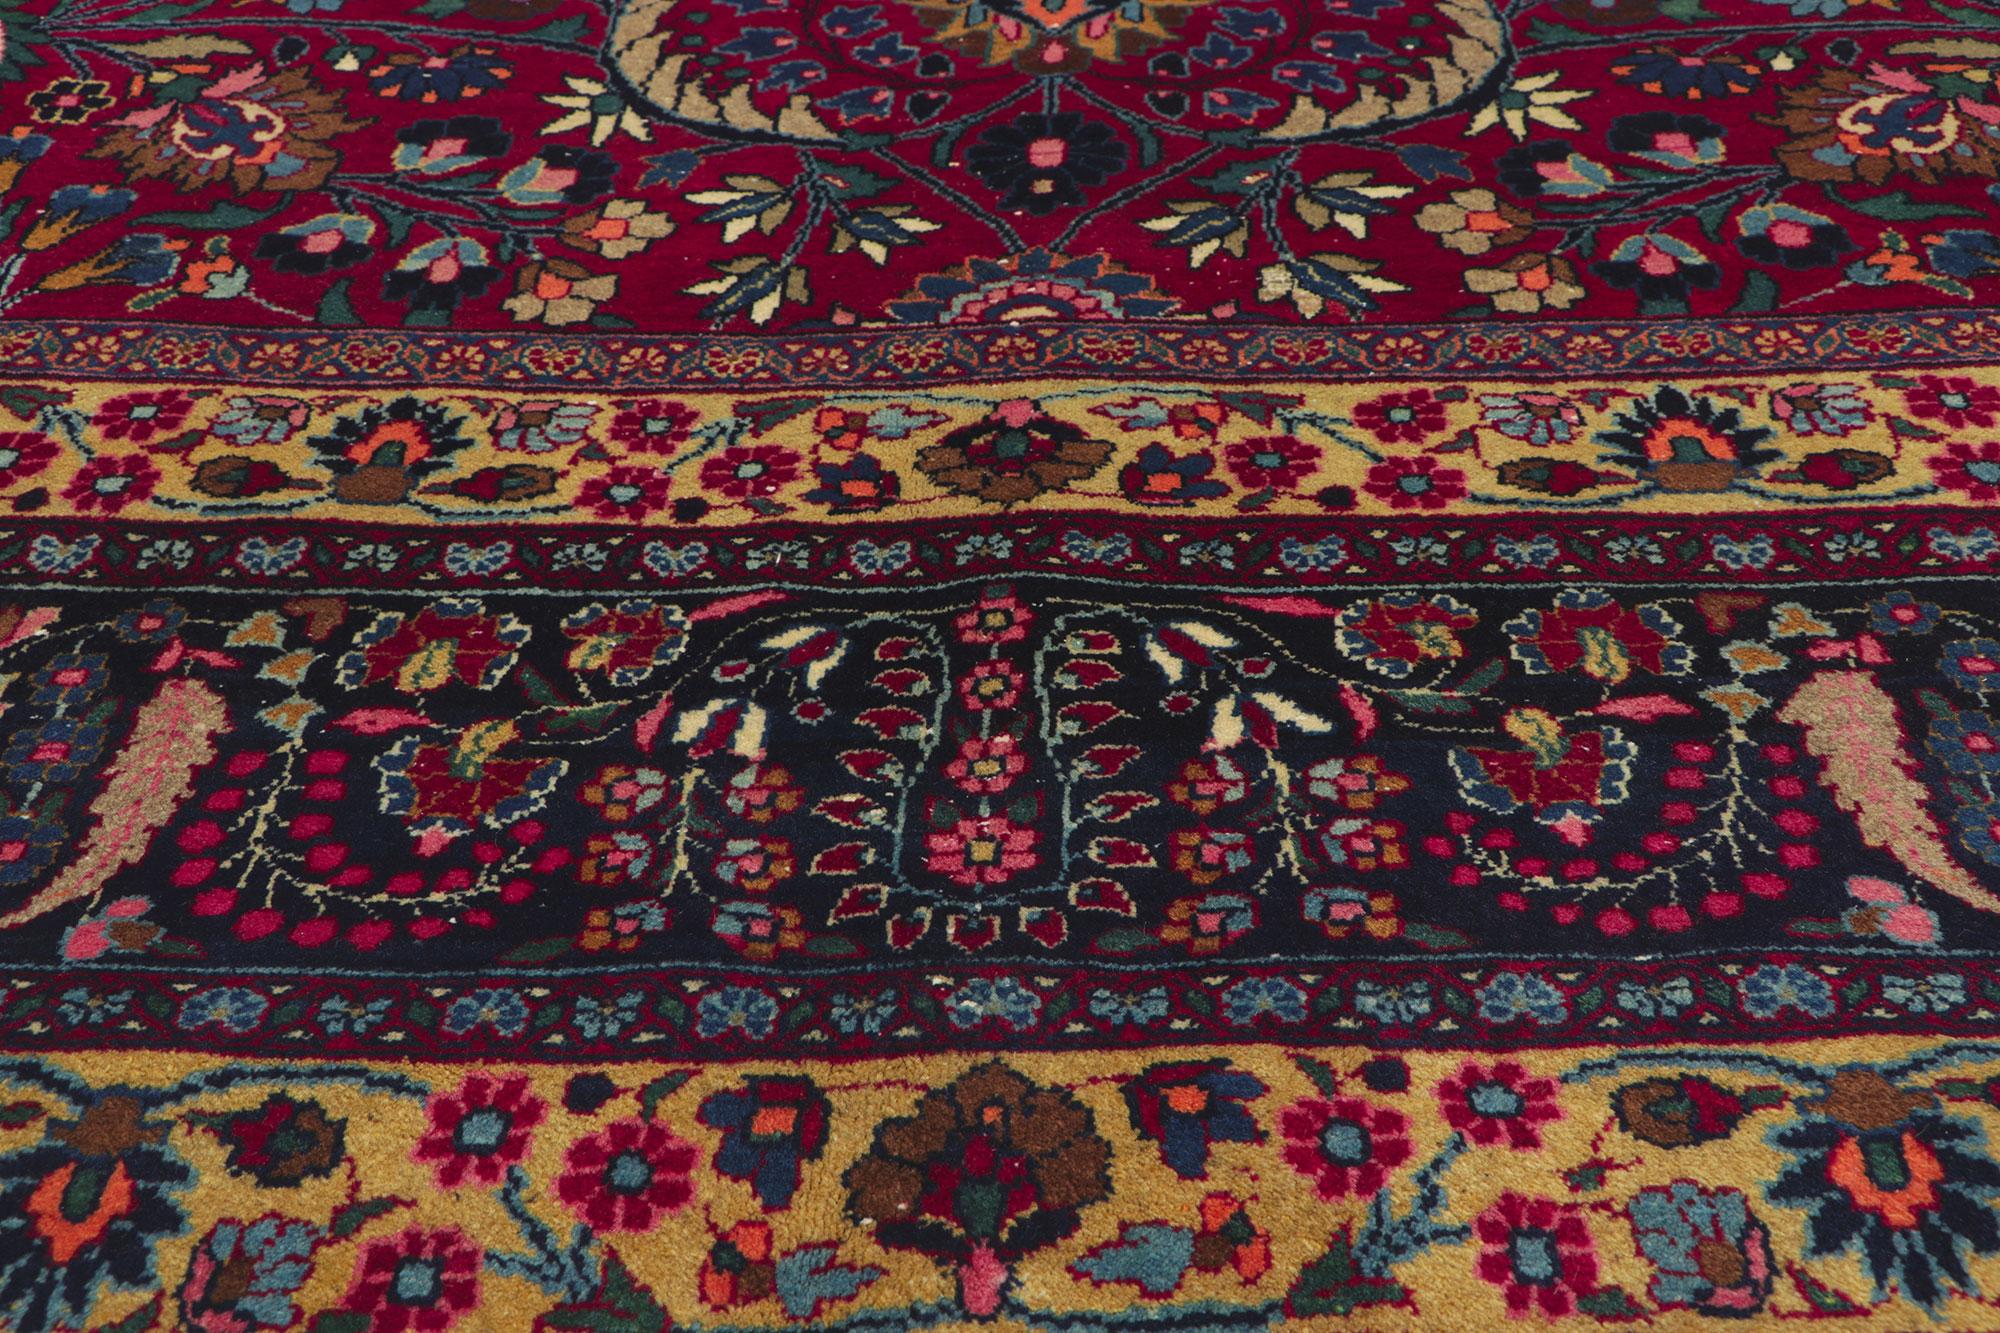 Antique Persian Mashhad Rug, Refined Elegance Meets Beguiling Decadence In Good Condition For Sale In Dallas, TX